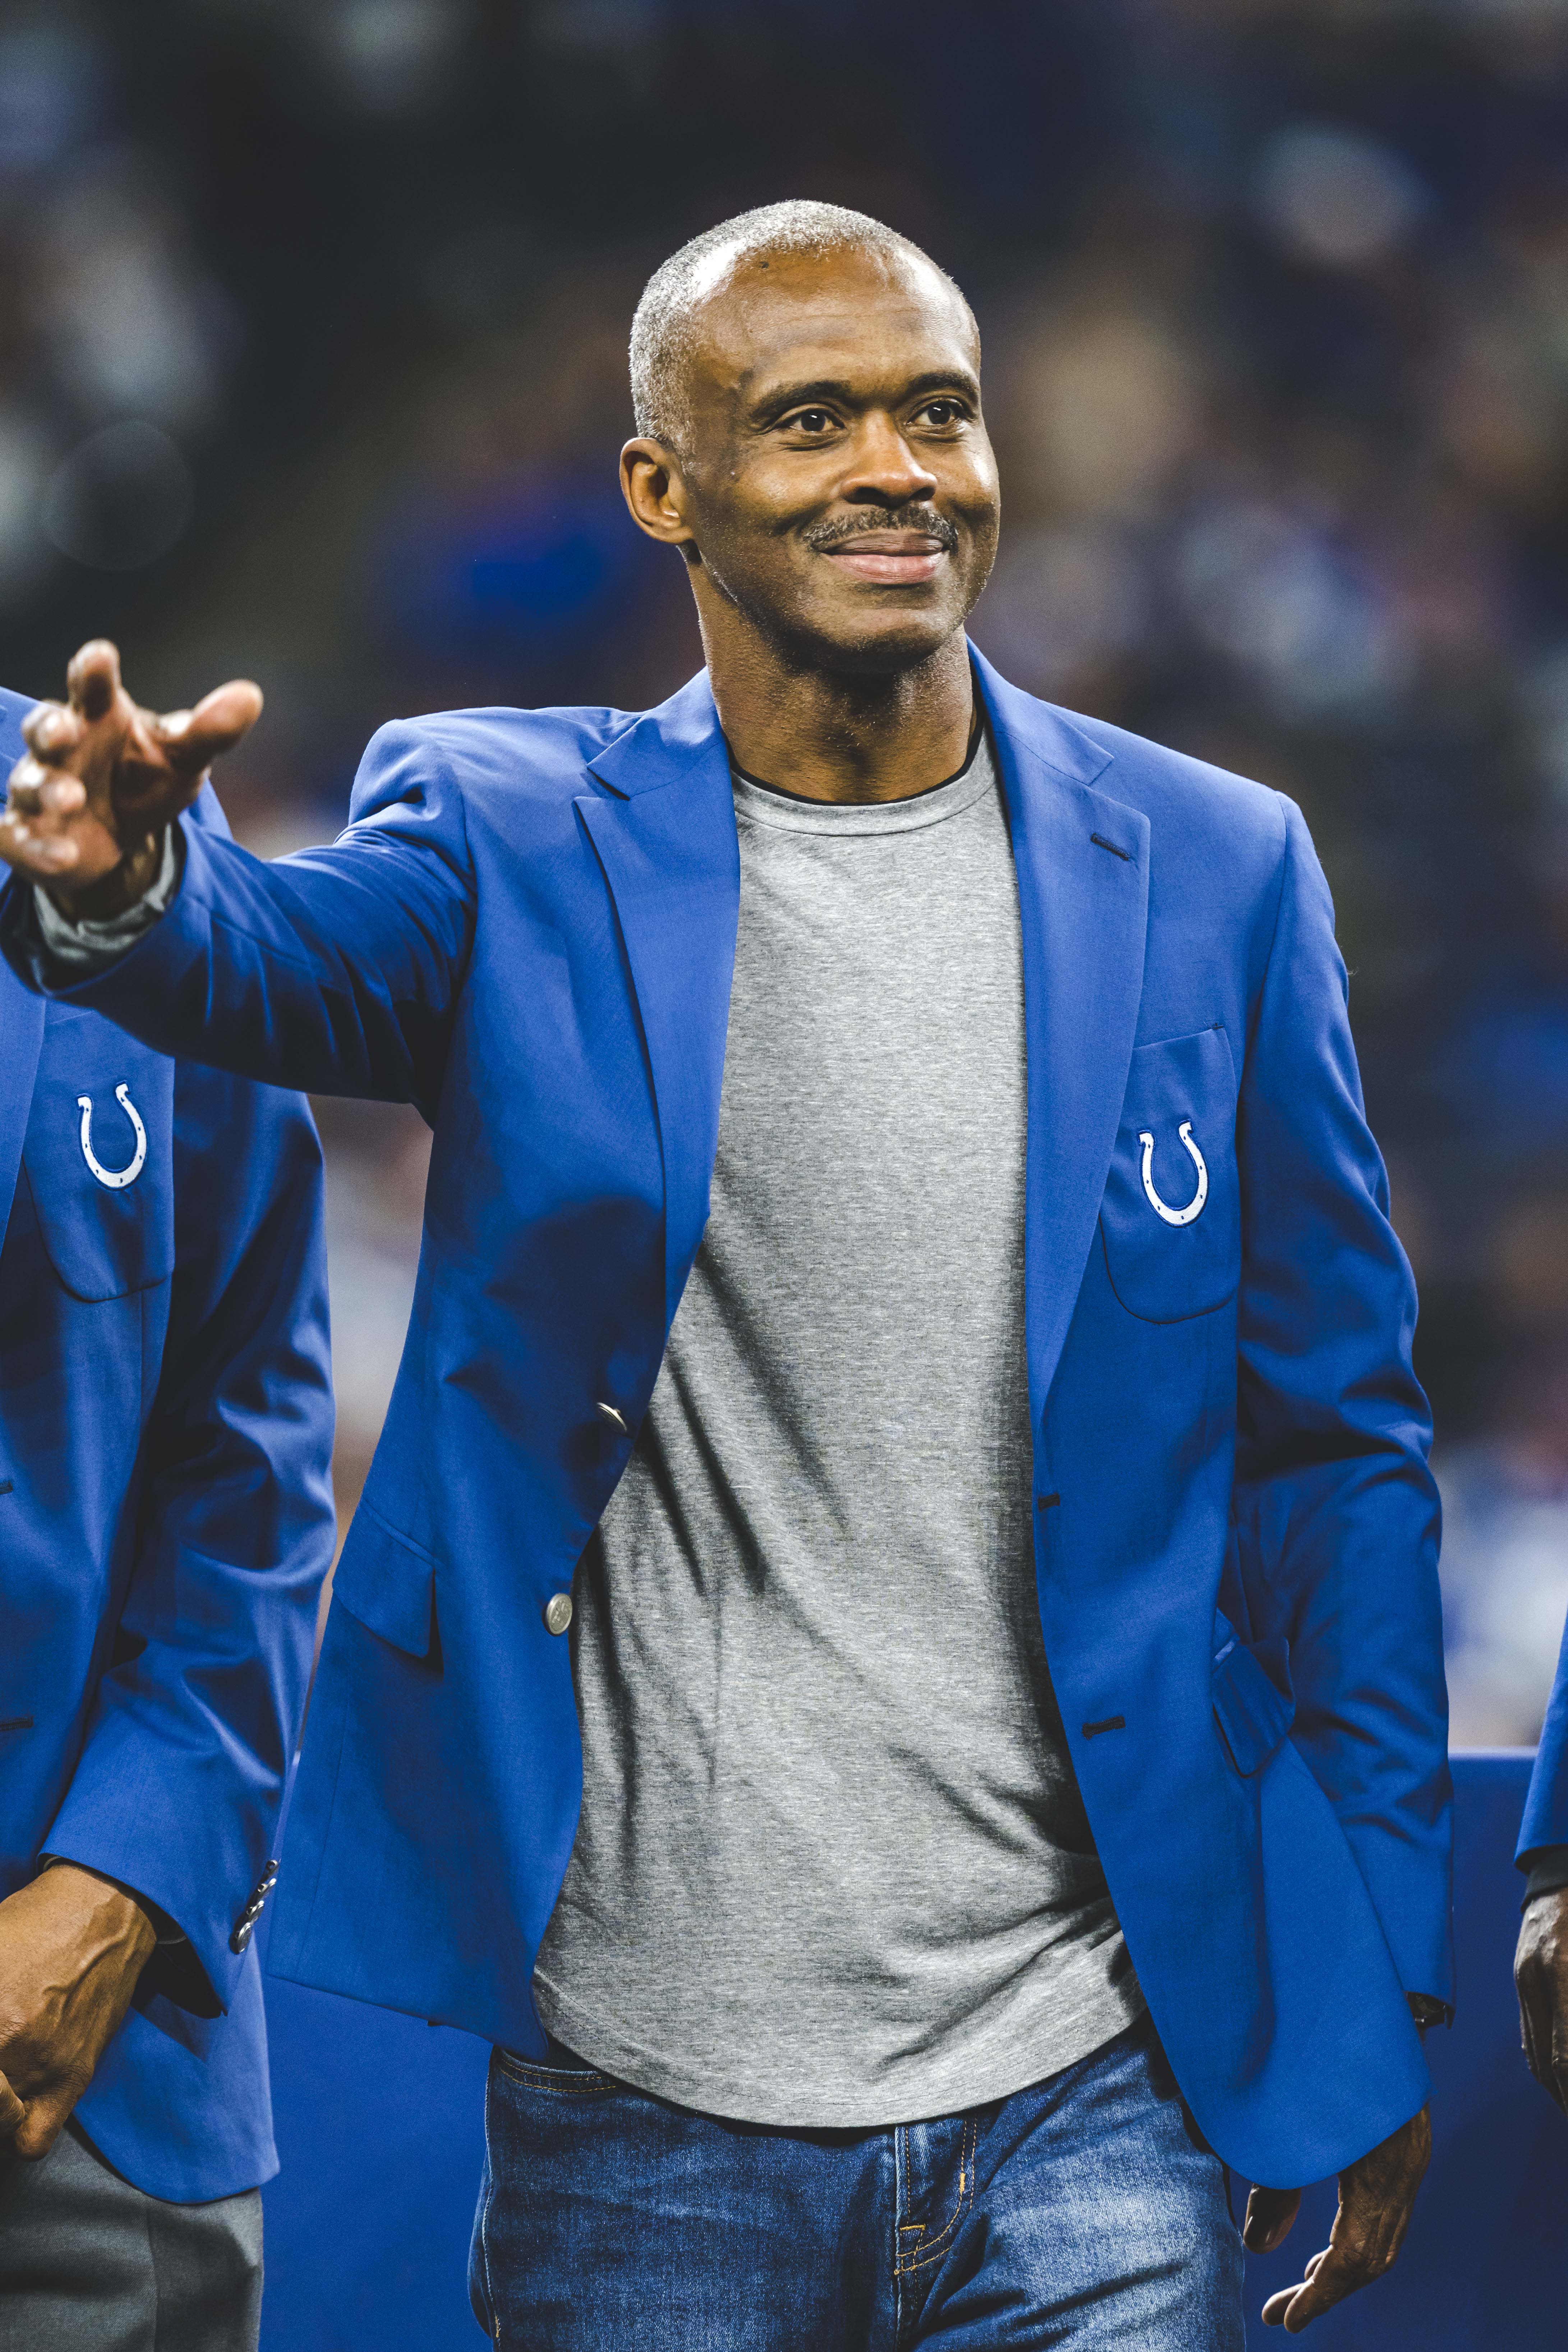 Marvin Harrison, Jr. is “The Terminator” of College Football